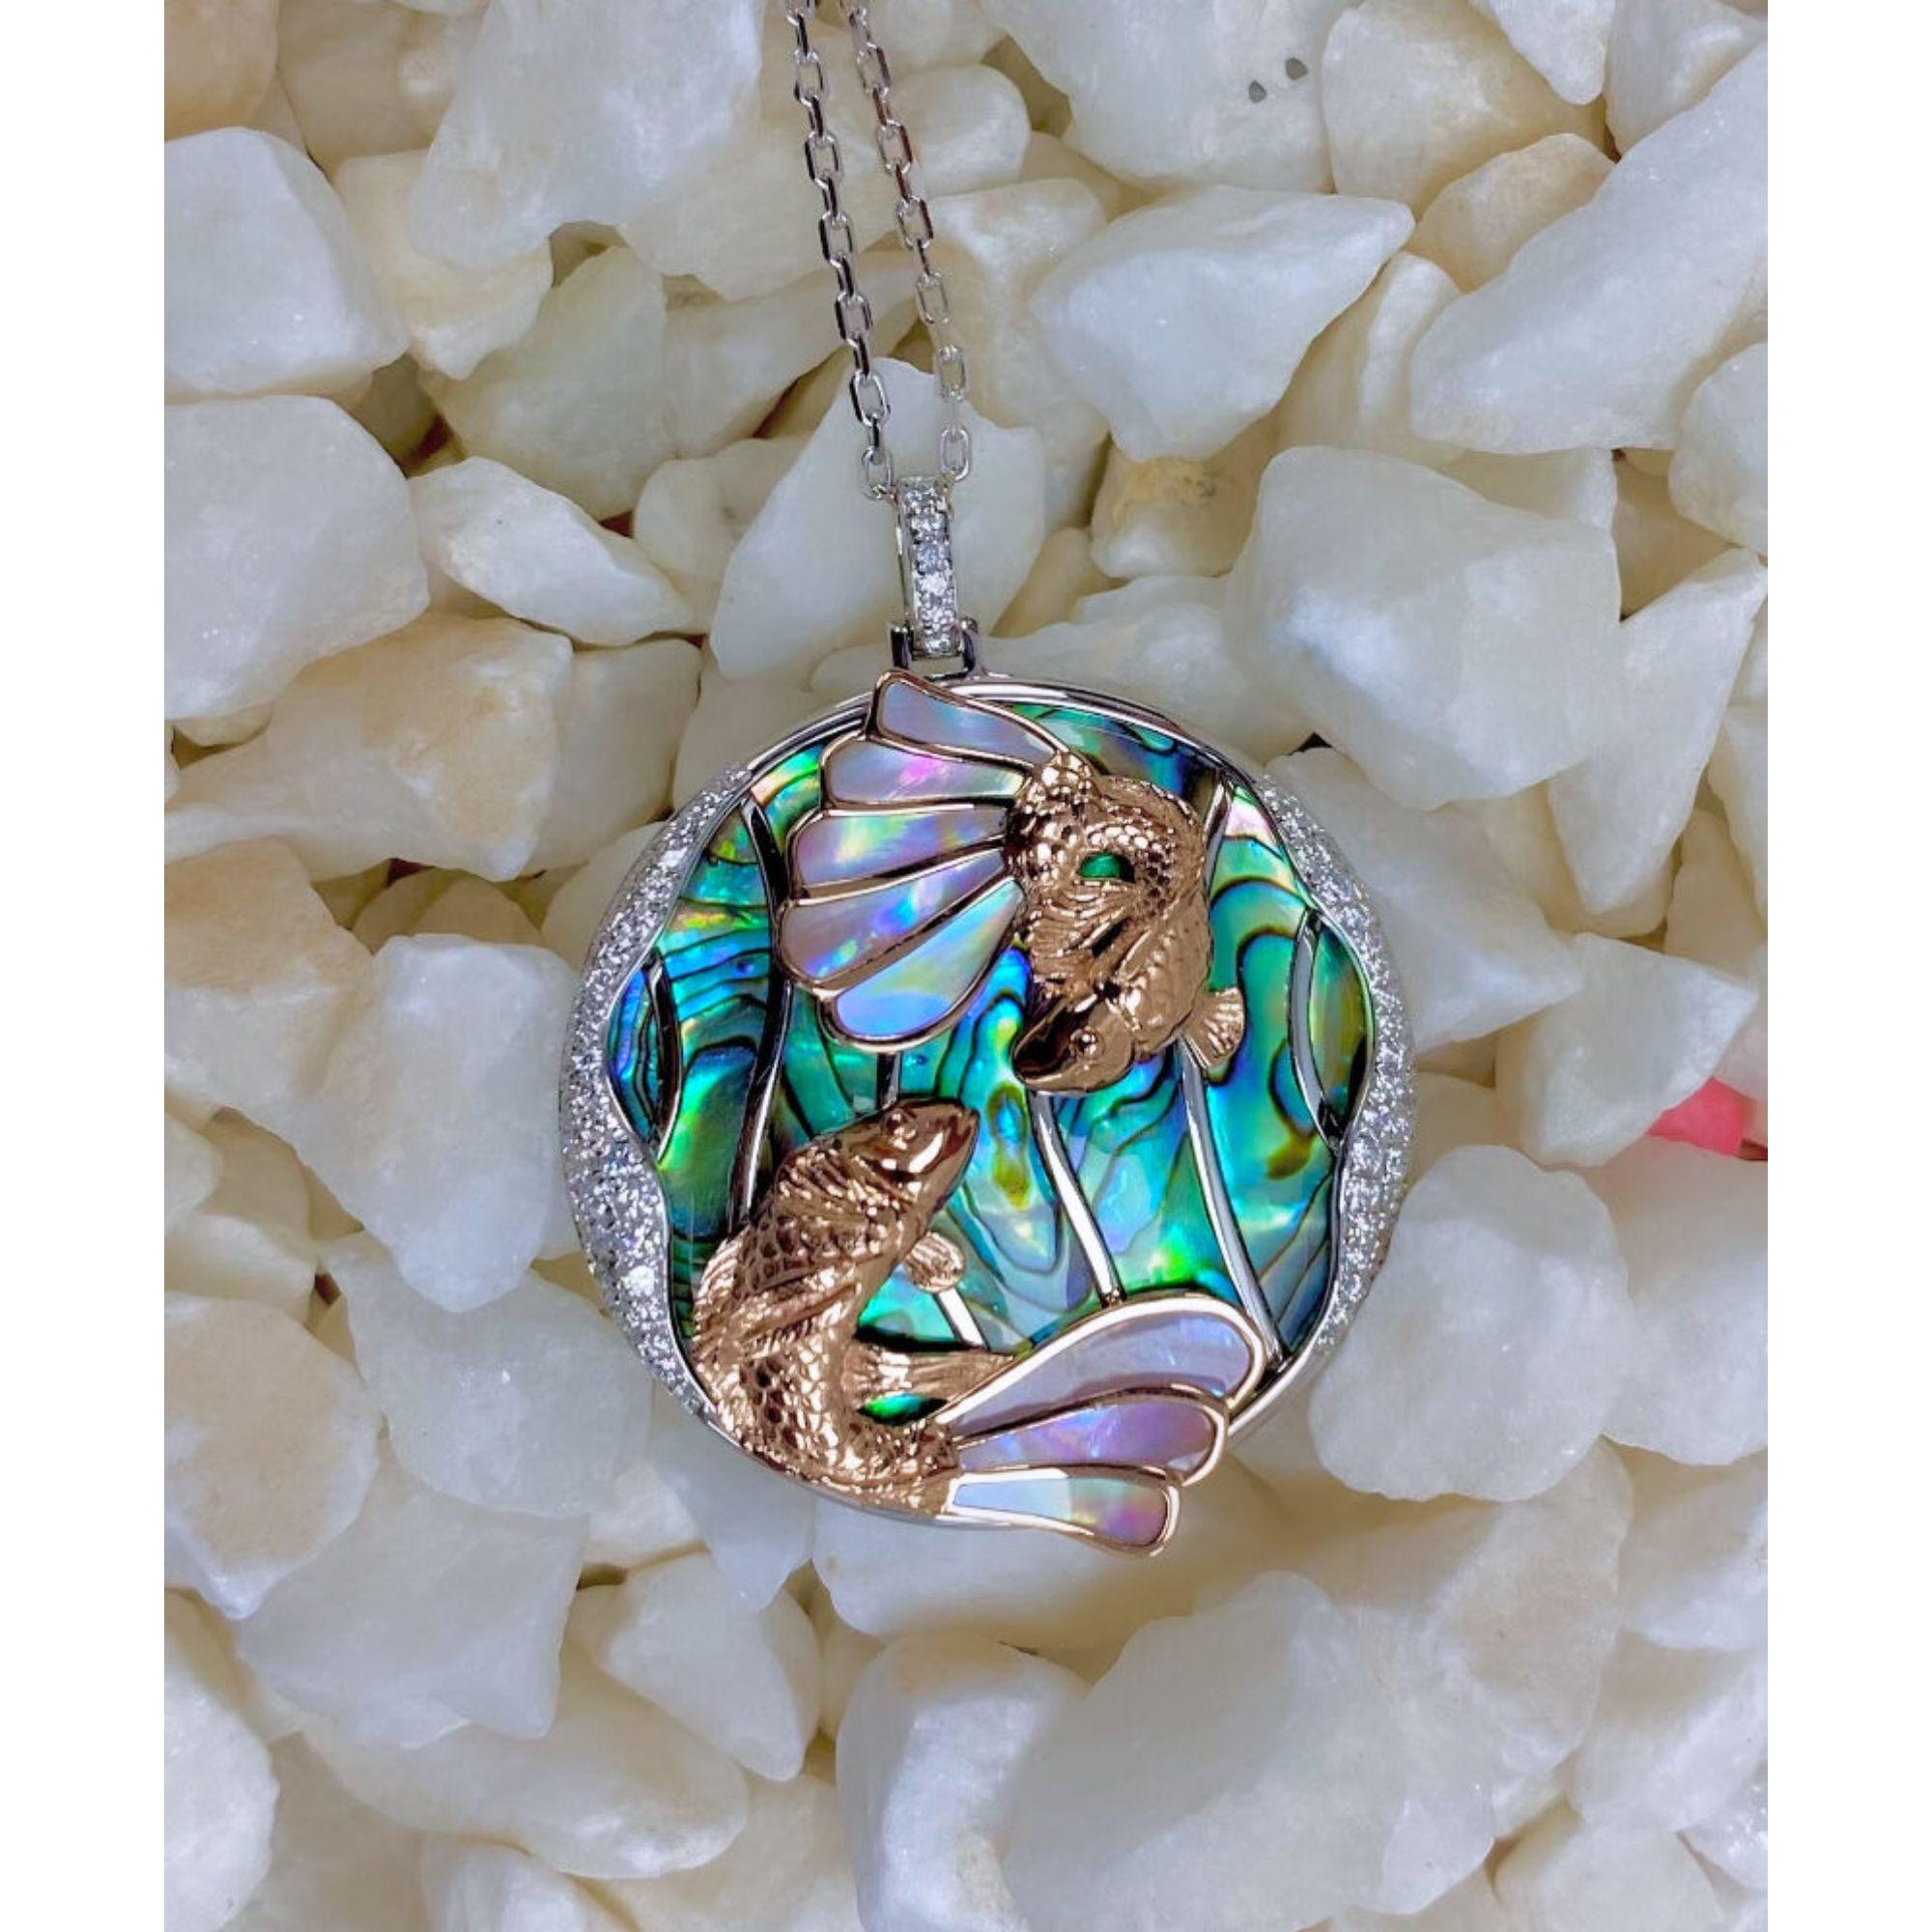 Large Koi Fishes Pink Mother Of Pearl With Abalone Background, Pendant On Diamond Bale With Chain, 0.43 Ct, (approximately 31mm / 39 mm including bale)

Available in other metal/ gemstone options: This Natural Shell pendant can be made in white,